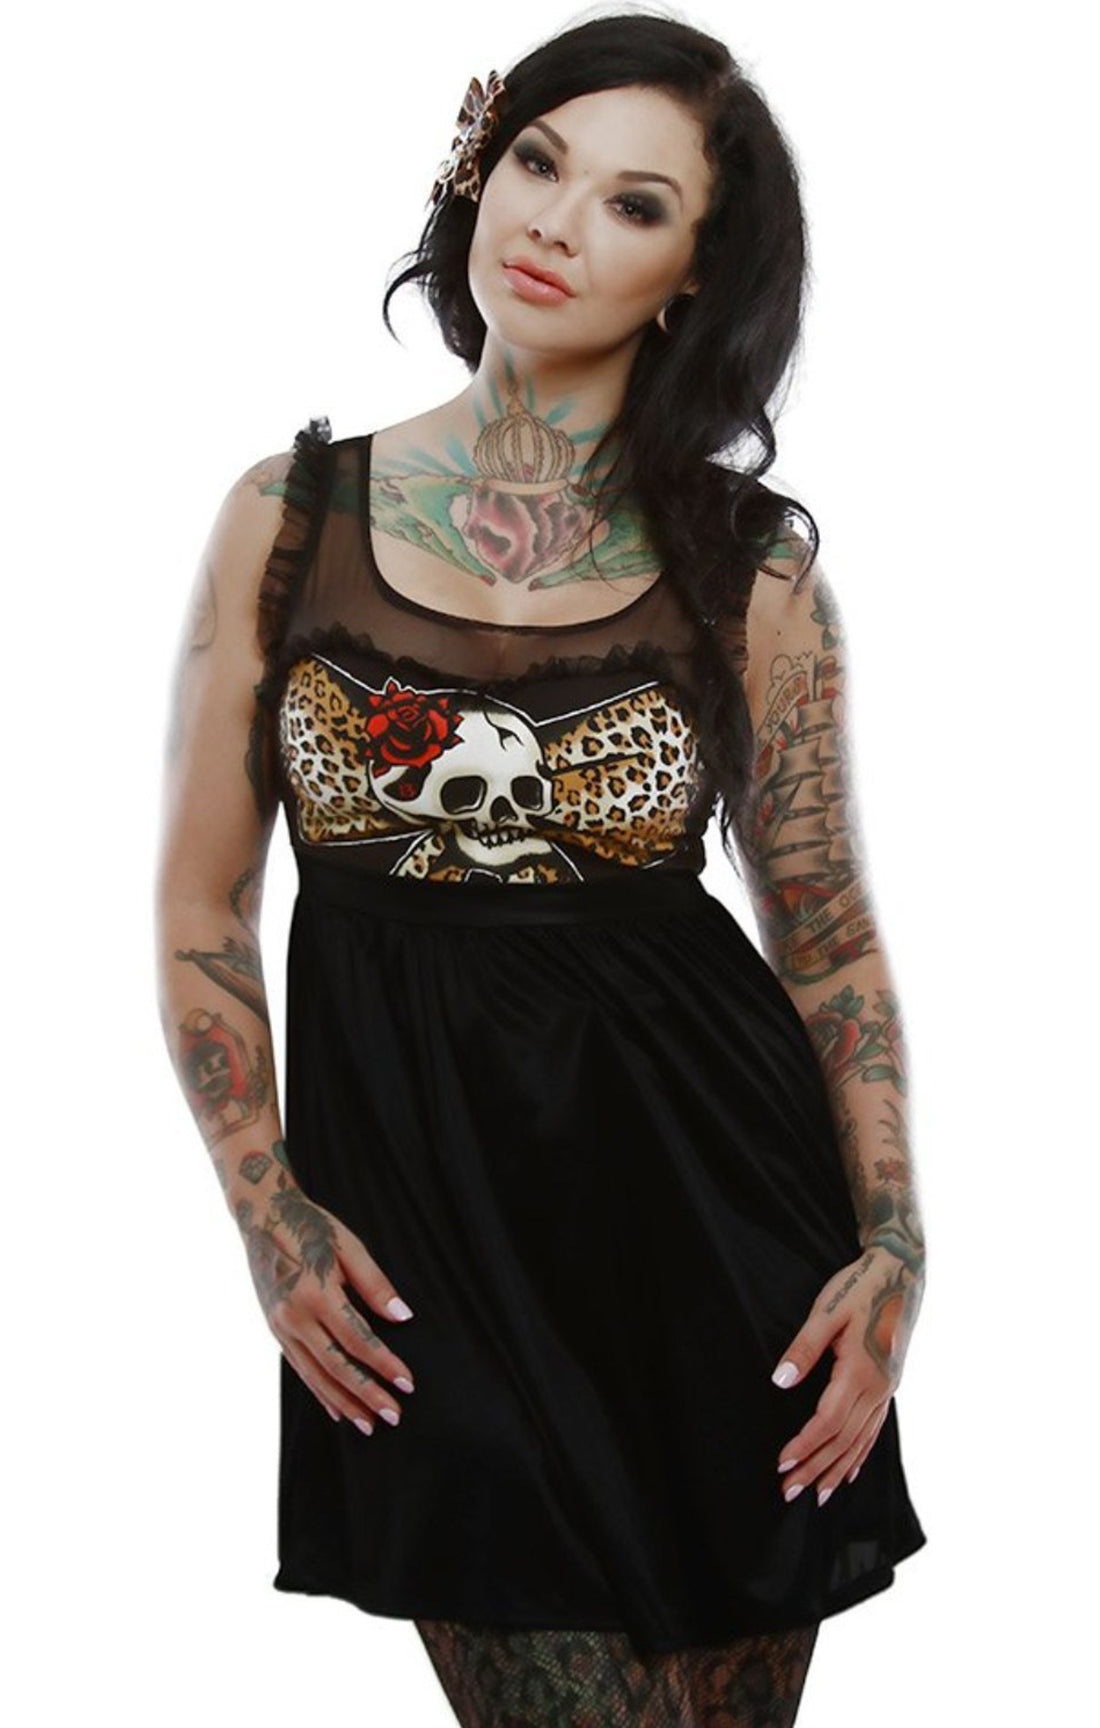 The LEOPARD BOW SKULL Dress - SMALL AND MEDIUM ONLY!